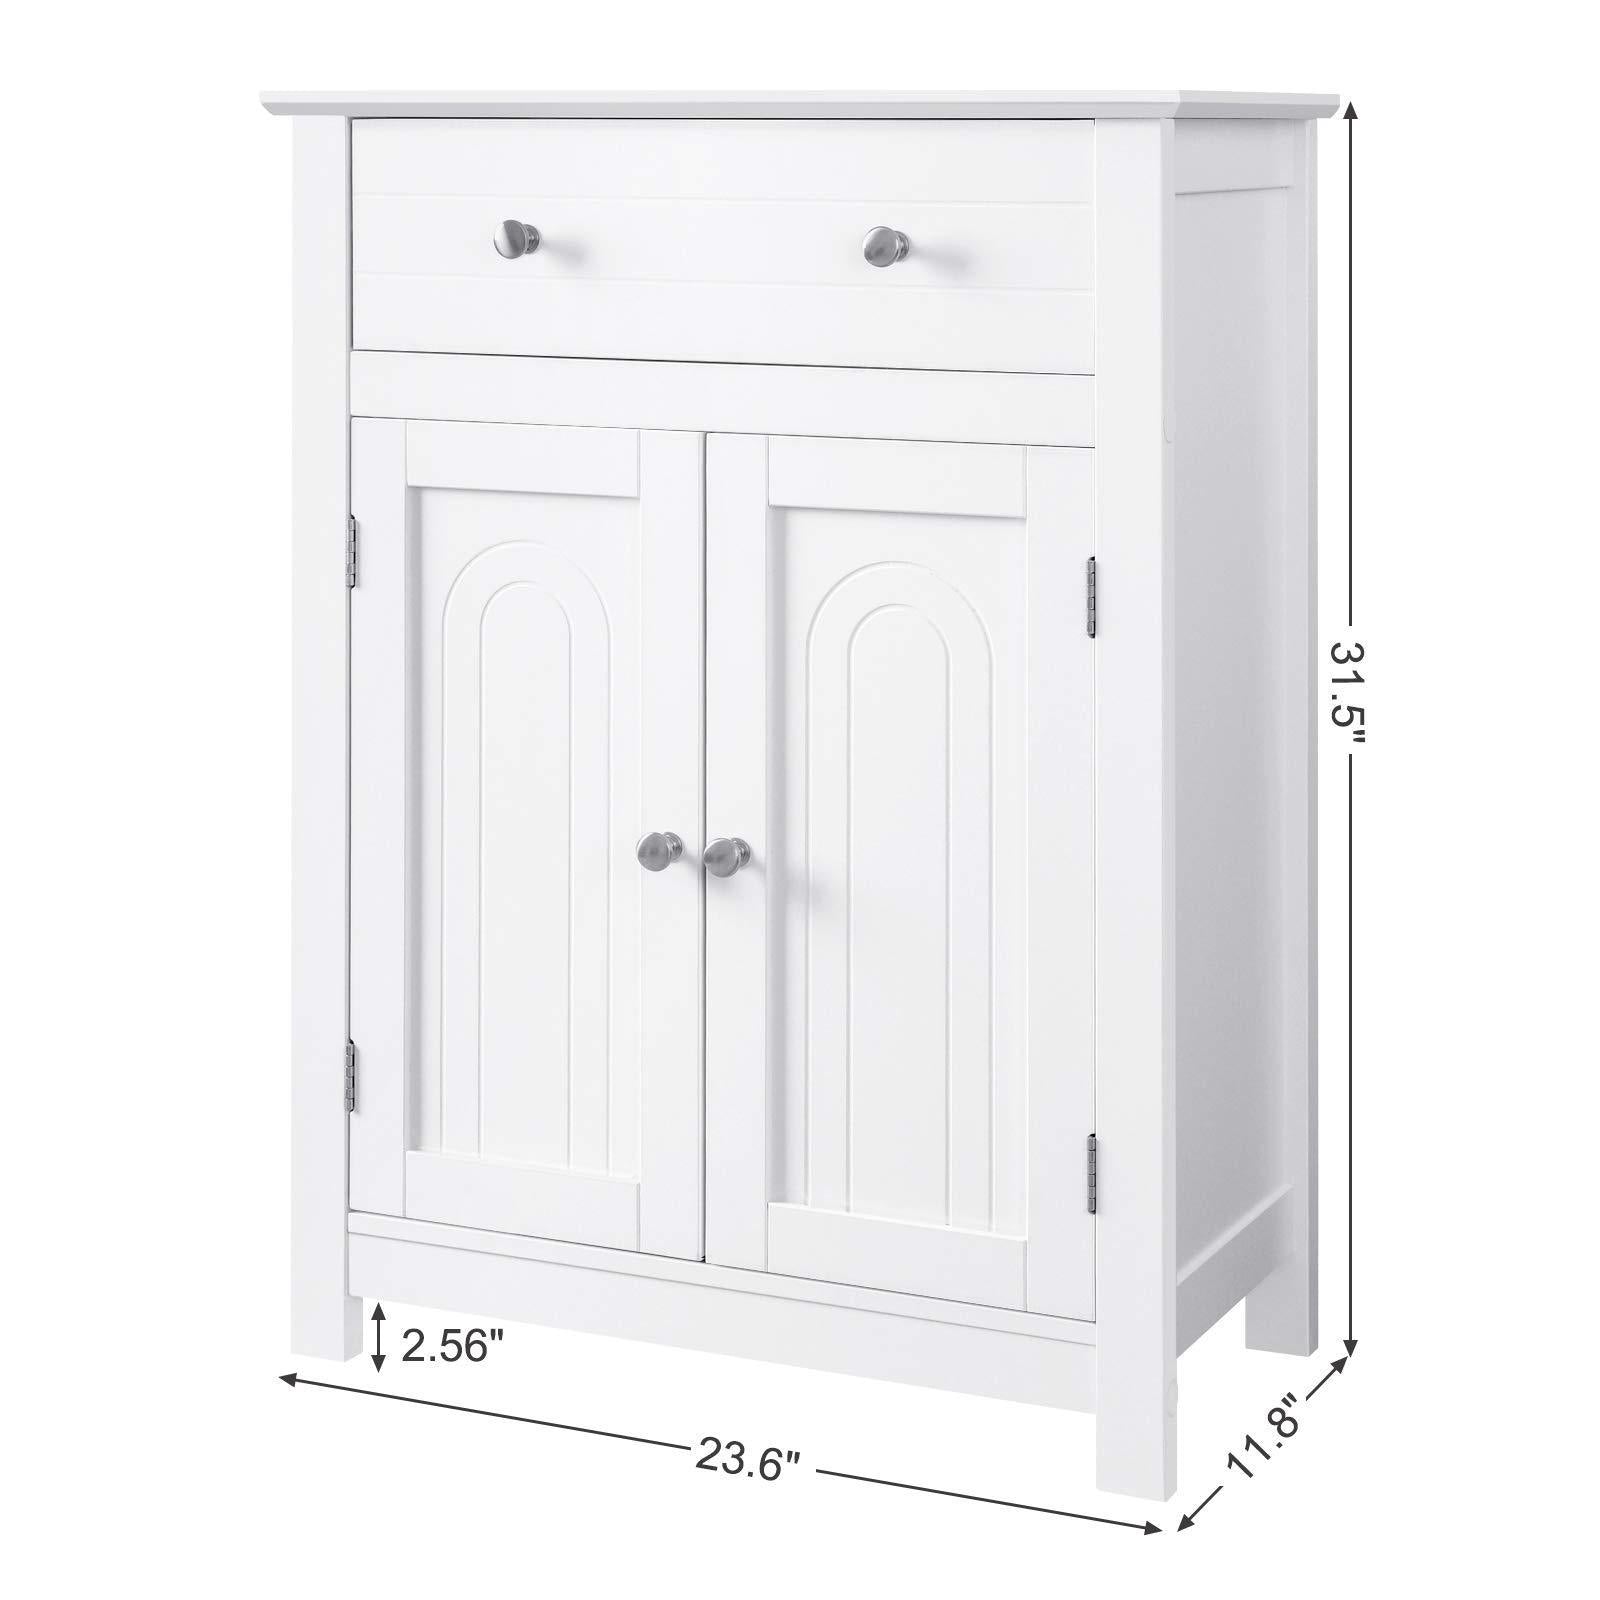 Top vasagle free standing bathroom cabinet with drawer and adjustable shelf kitchen cupboard wooden entryway storage cabinet white 23 6 x 11 8 x 31 5 inches ubbc61wt